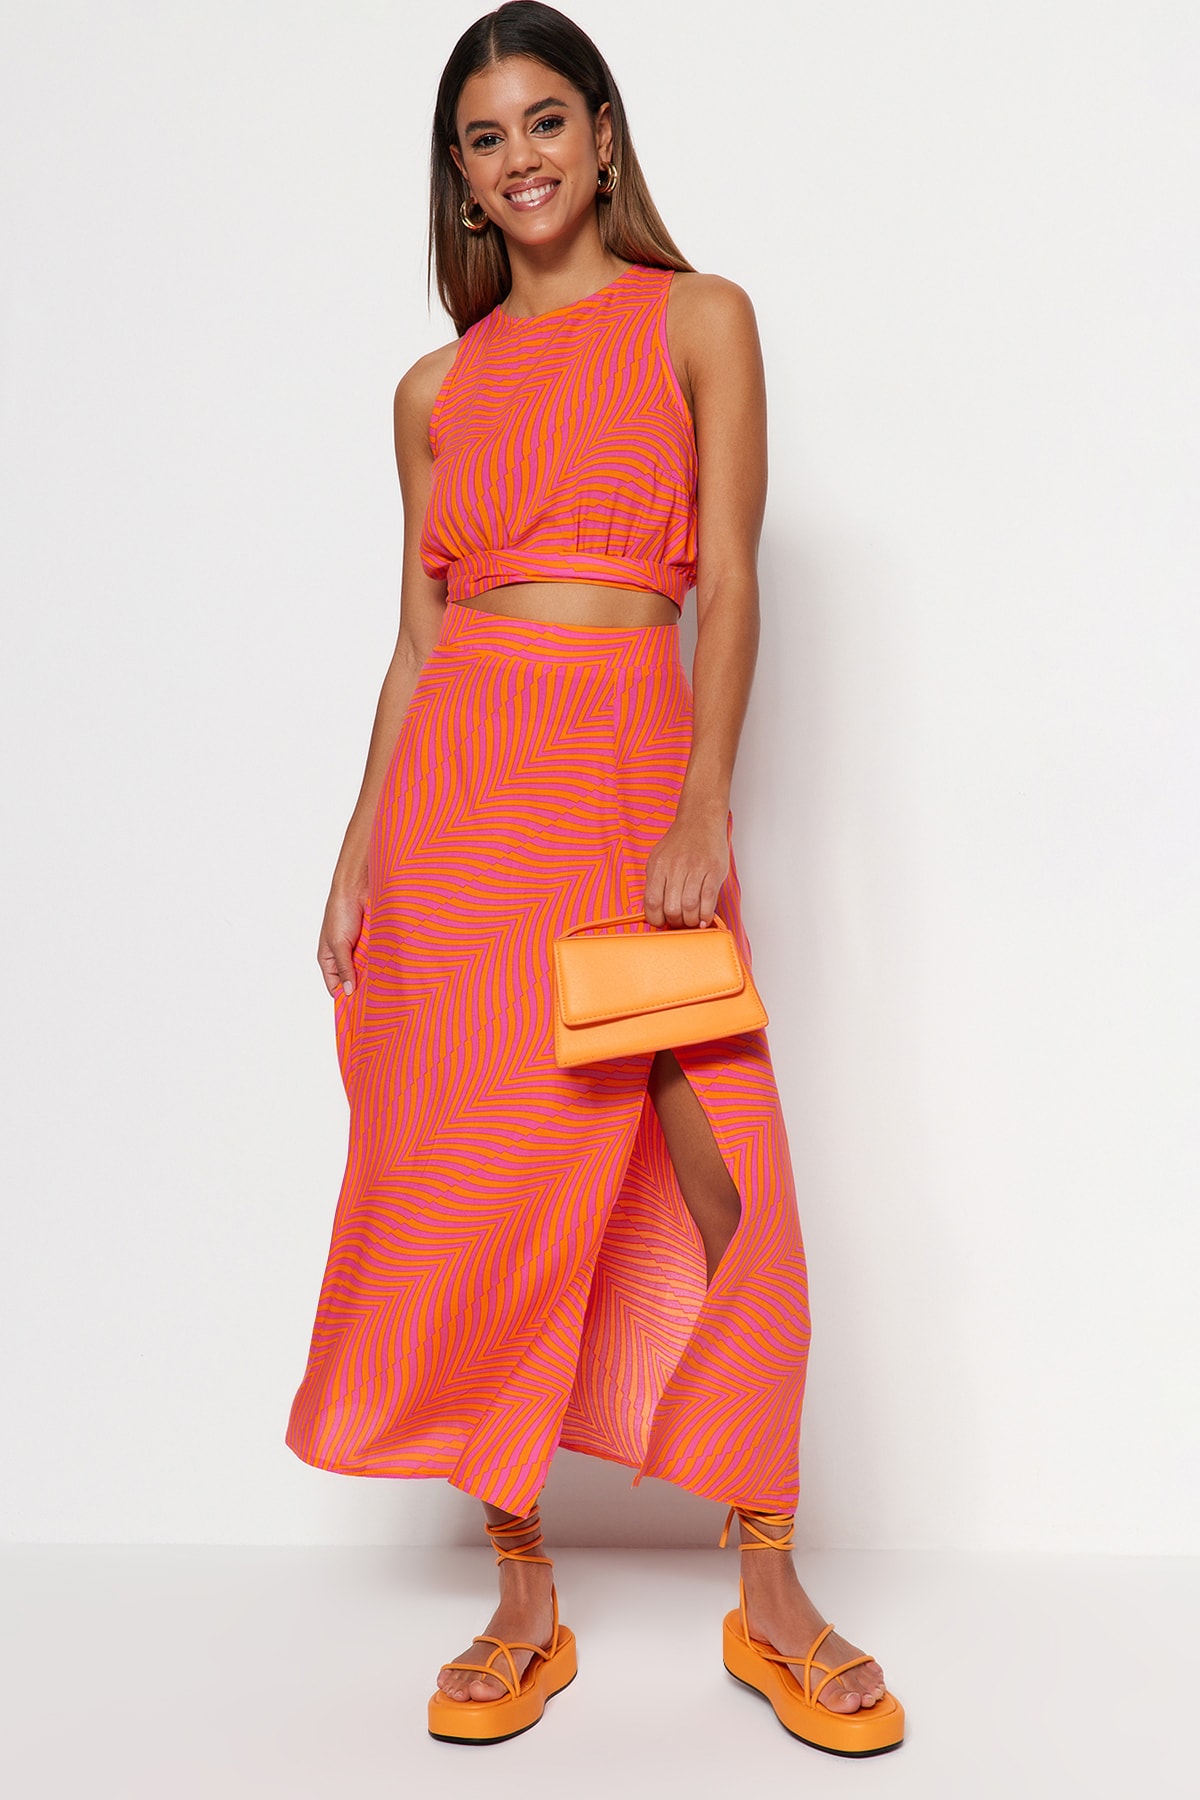 Trendyol Orange Woven Midi Skirt with Viscose Fabric and Geometric Pattern with a Slit Detail